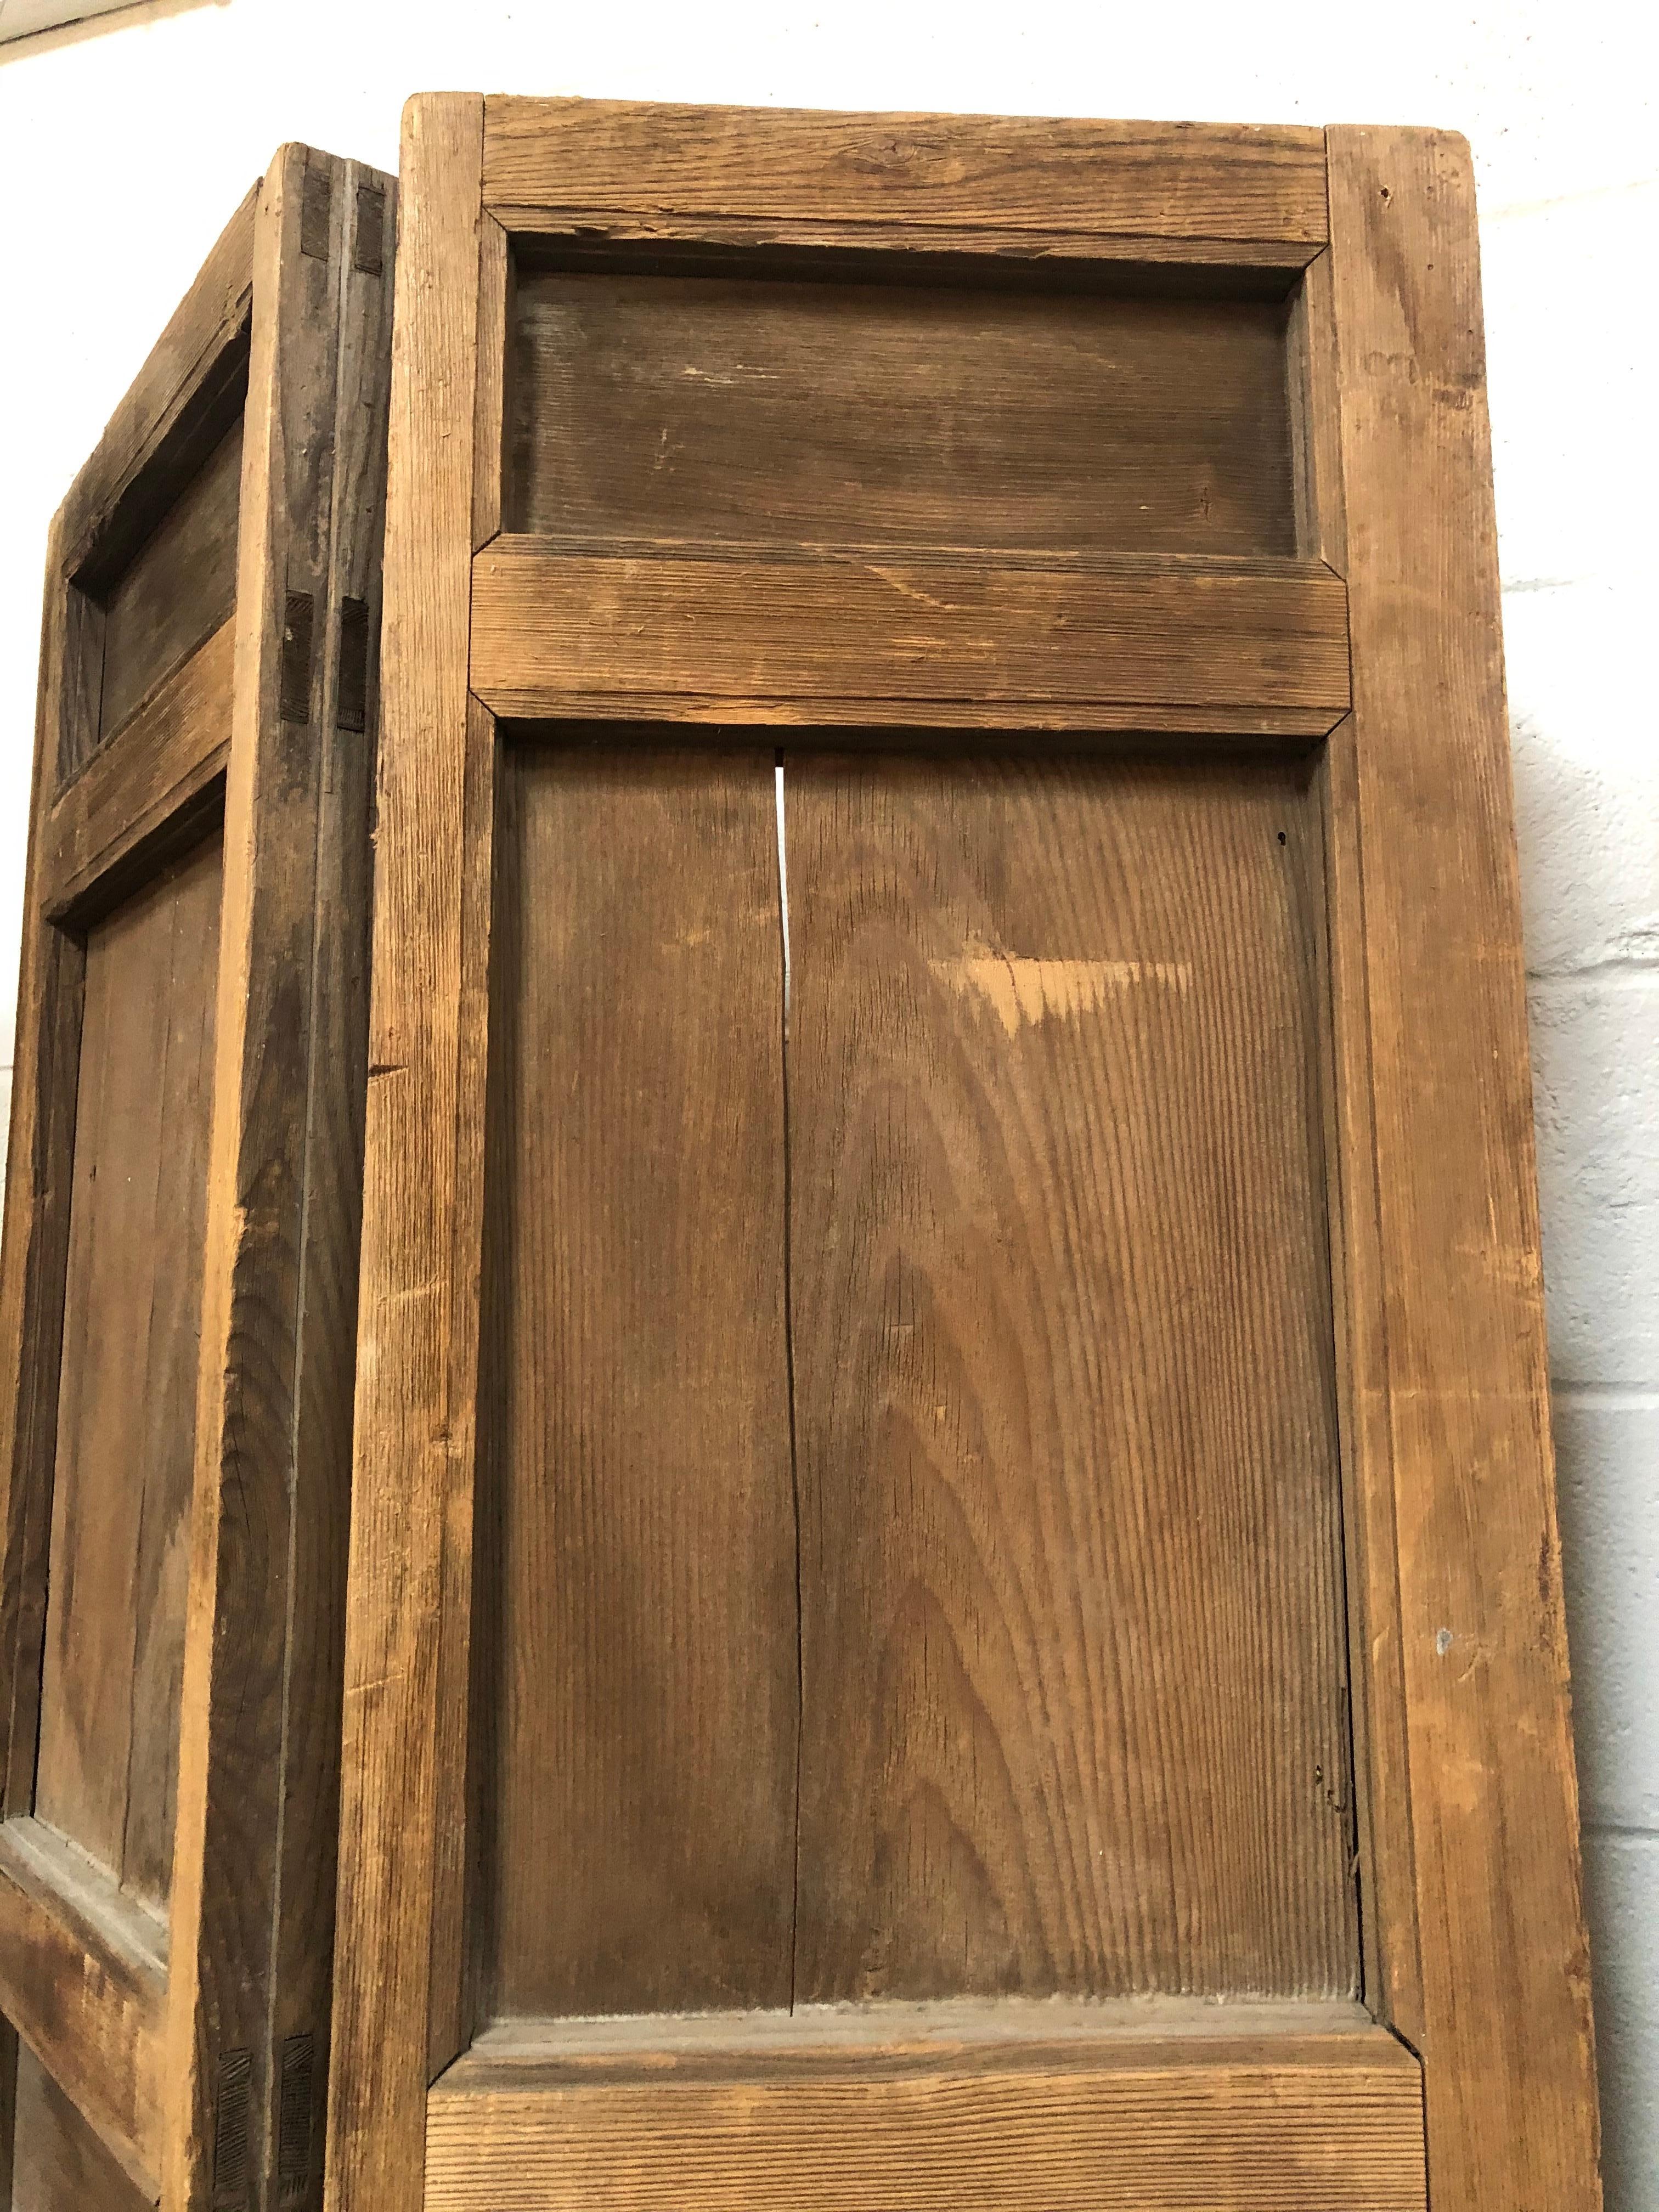 Vintage four panel wood screen would look amazing as a room divider, accent wall piece, garden entryway, or to hang plants on both inside or outside. Has original iron handles and fastening. Grain is shown in wood finish. Heavy enough to stand alone